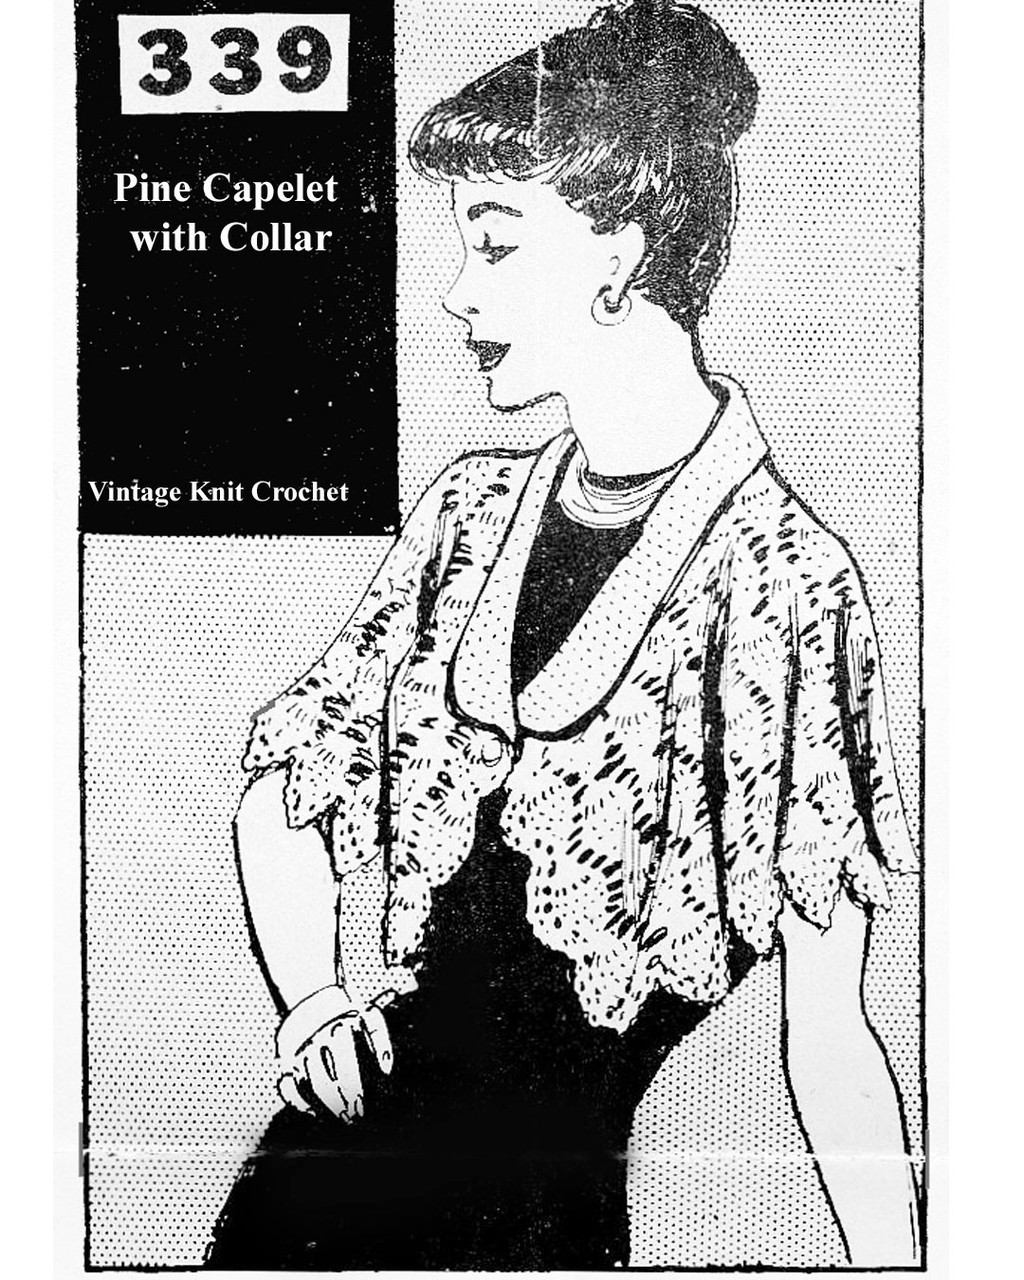 Vintage crocheted Pineapple Capelet Pattern No 339